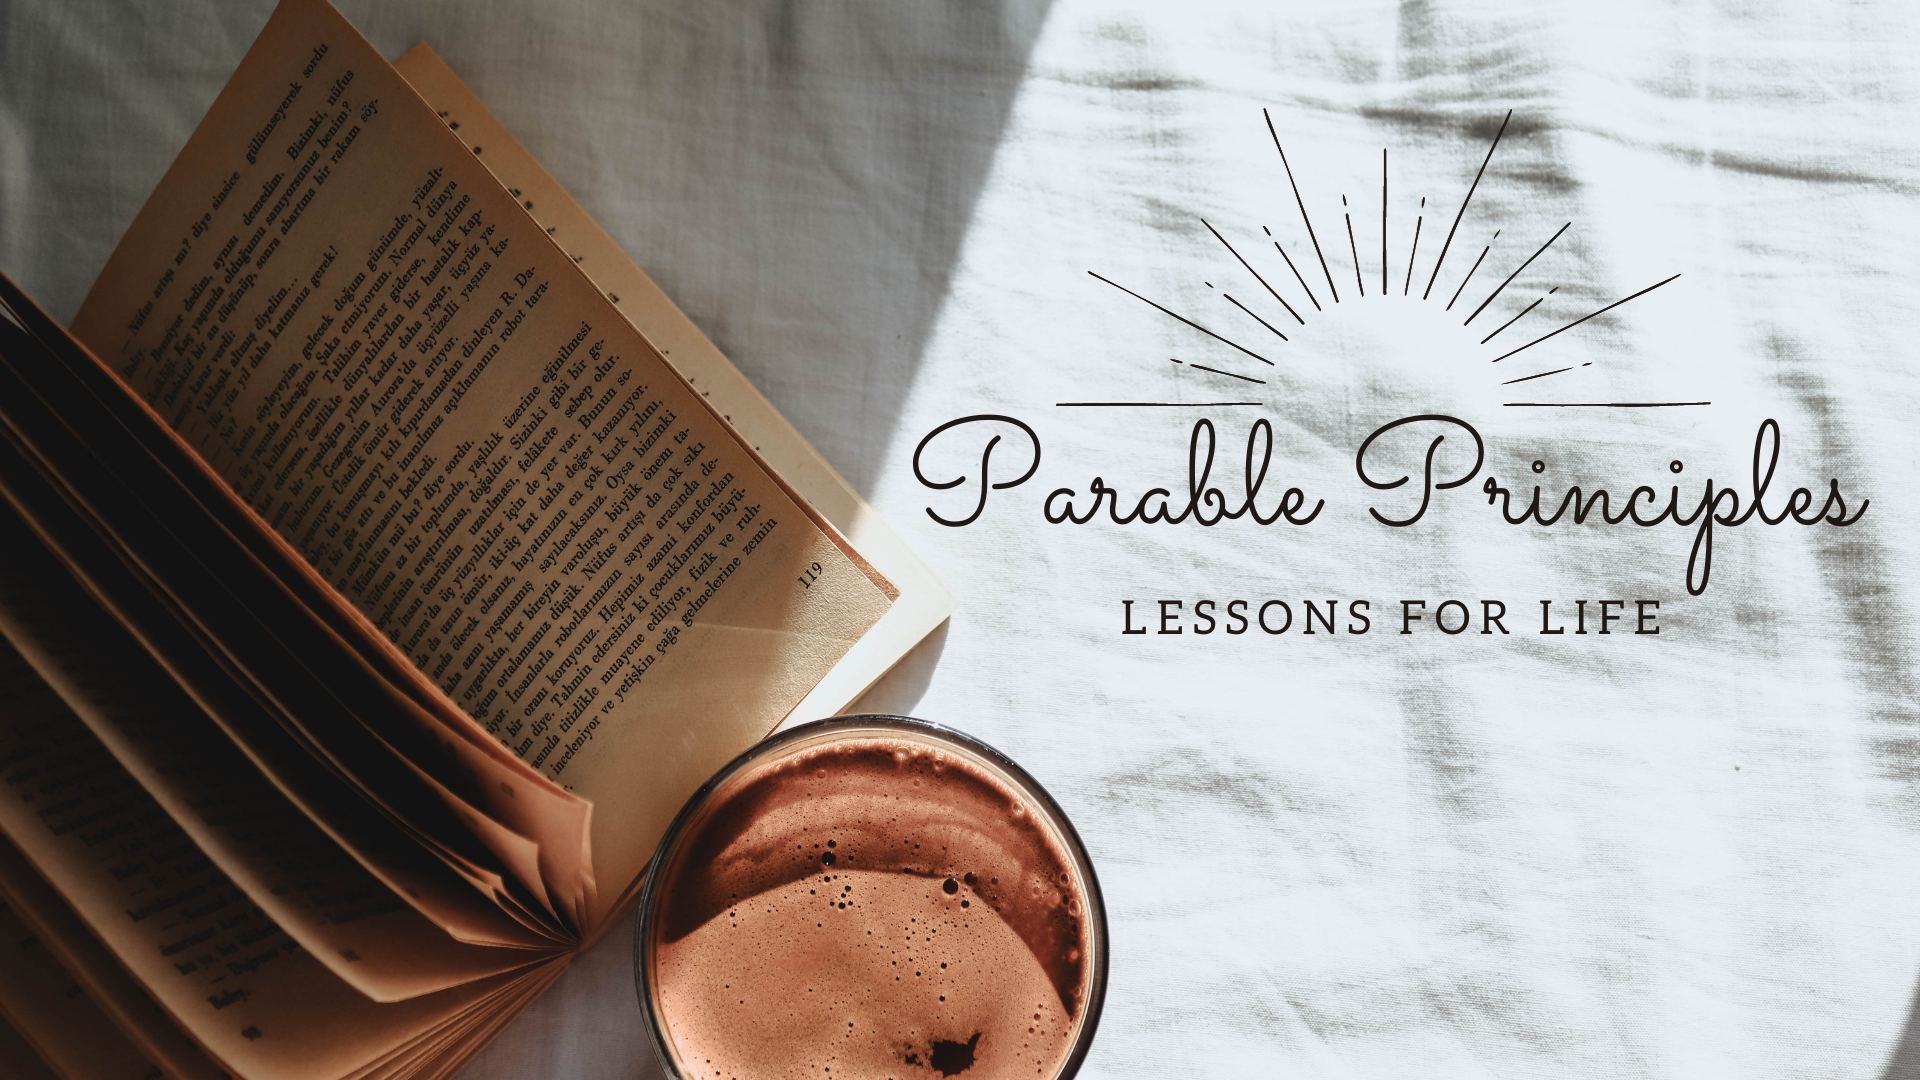 Principles from the Parables – “Newness in Christ”